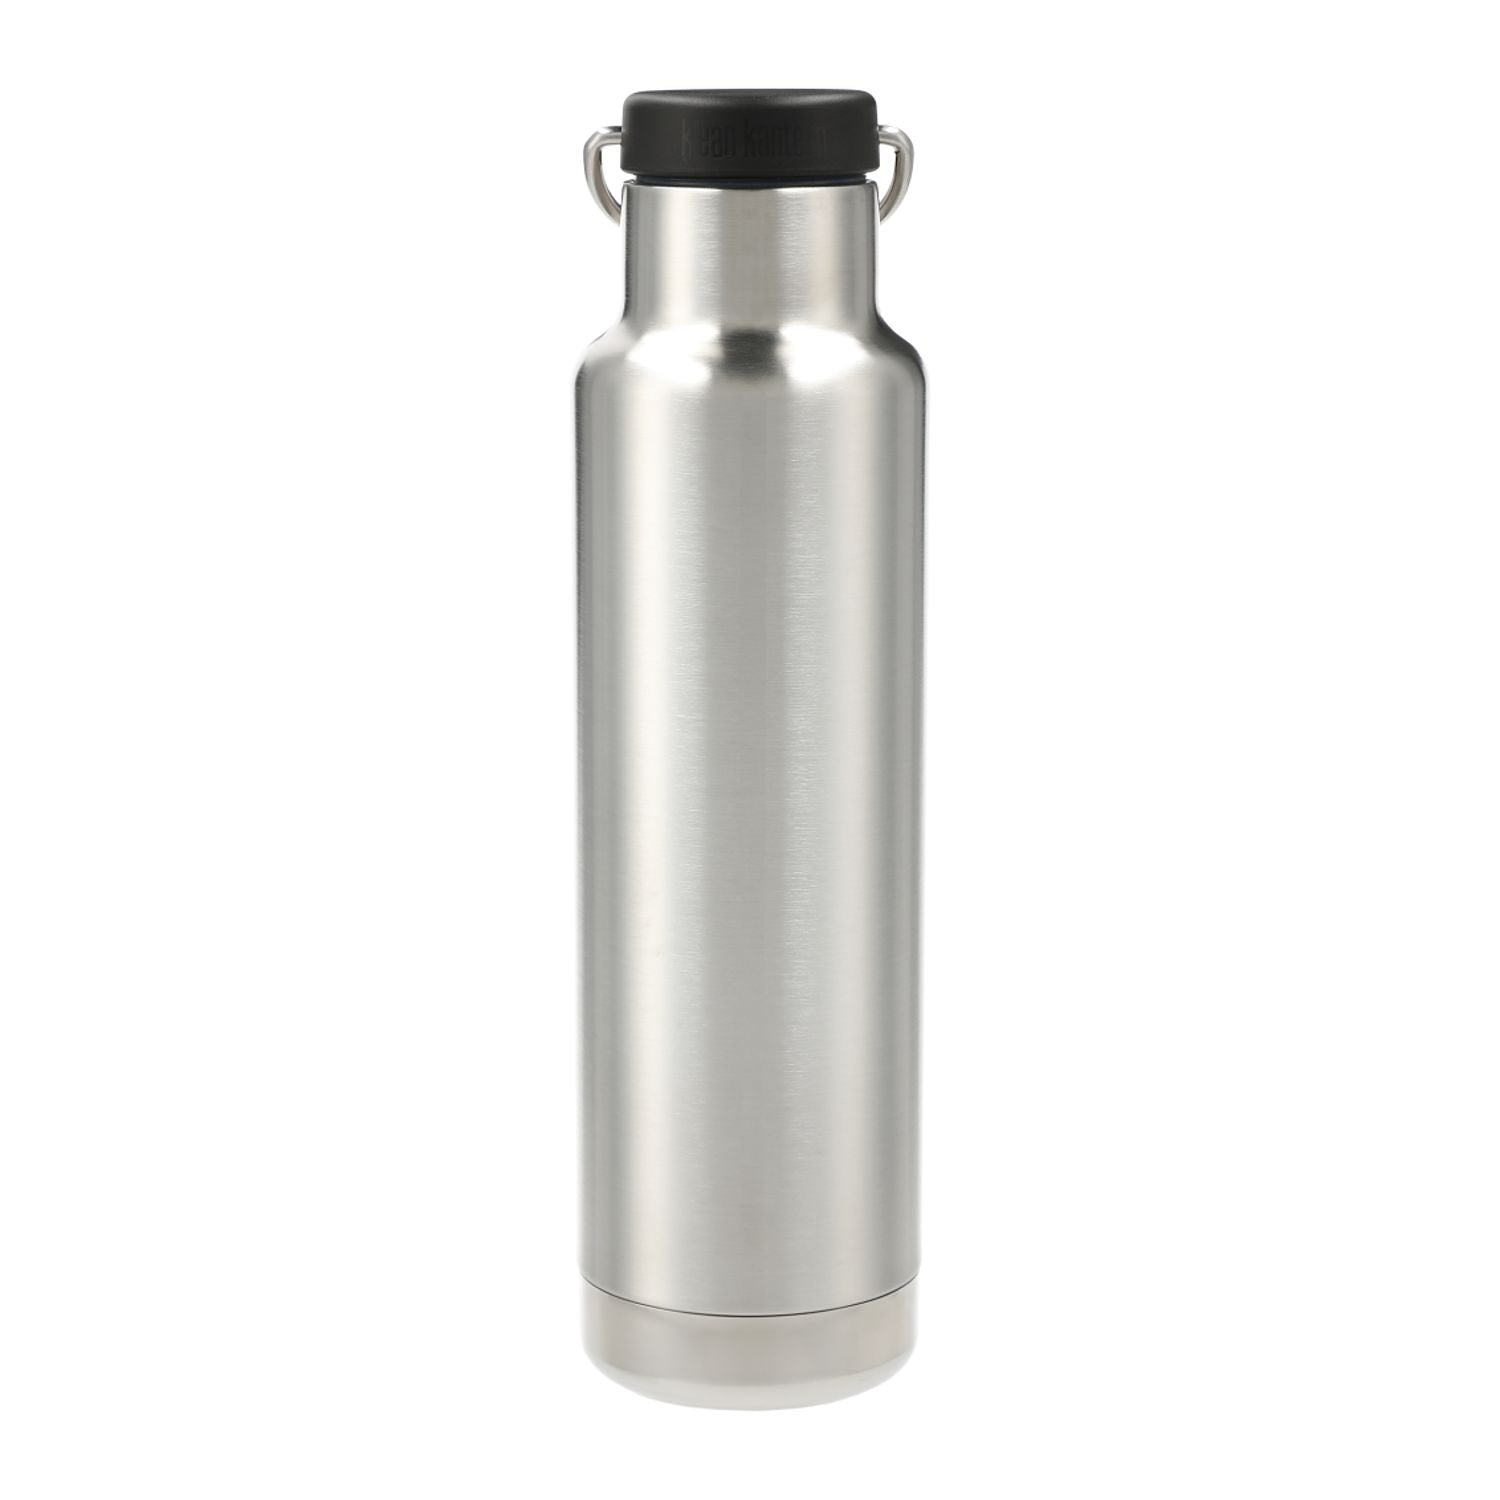 Klean Kanteen 20 oz Eco Insulated Classic With Loop Cap in silver